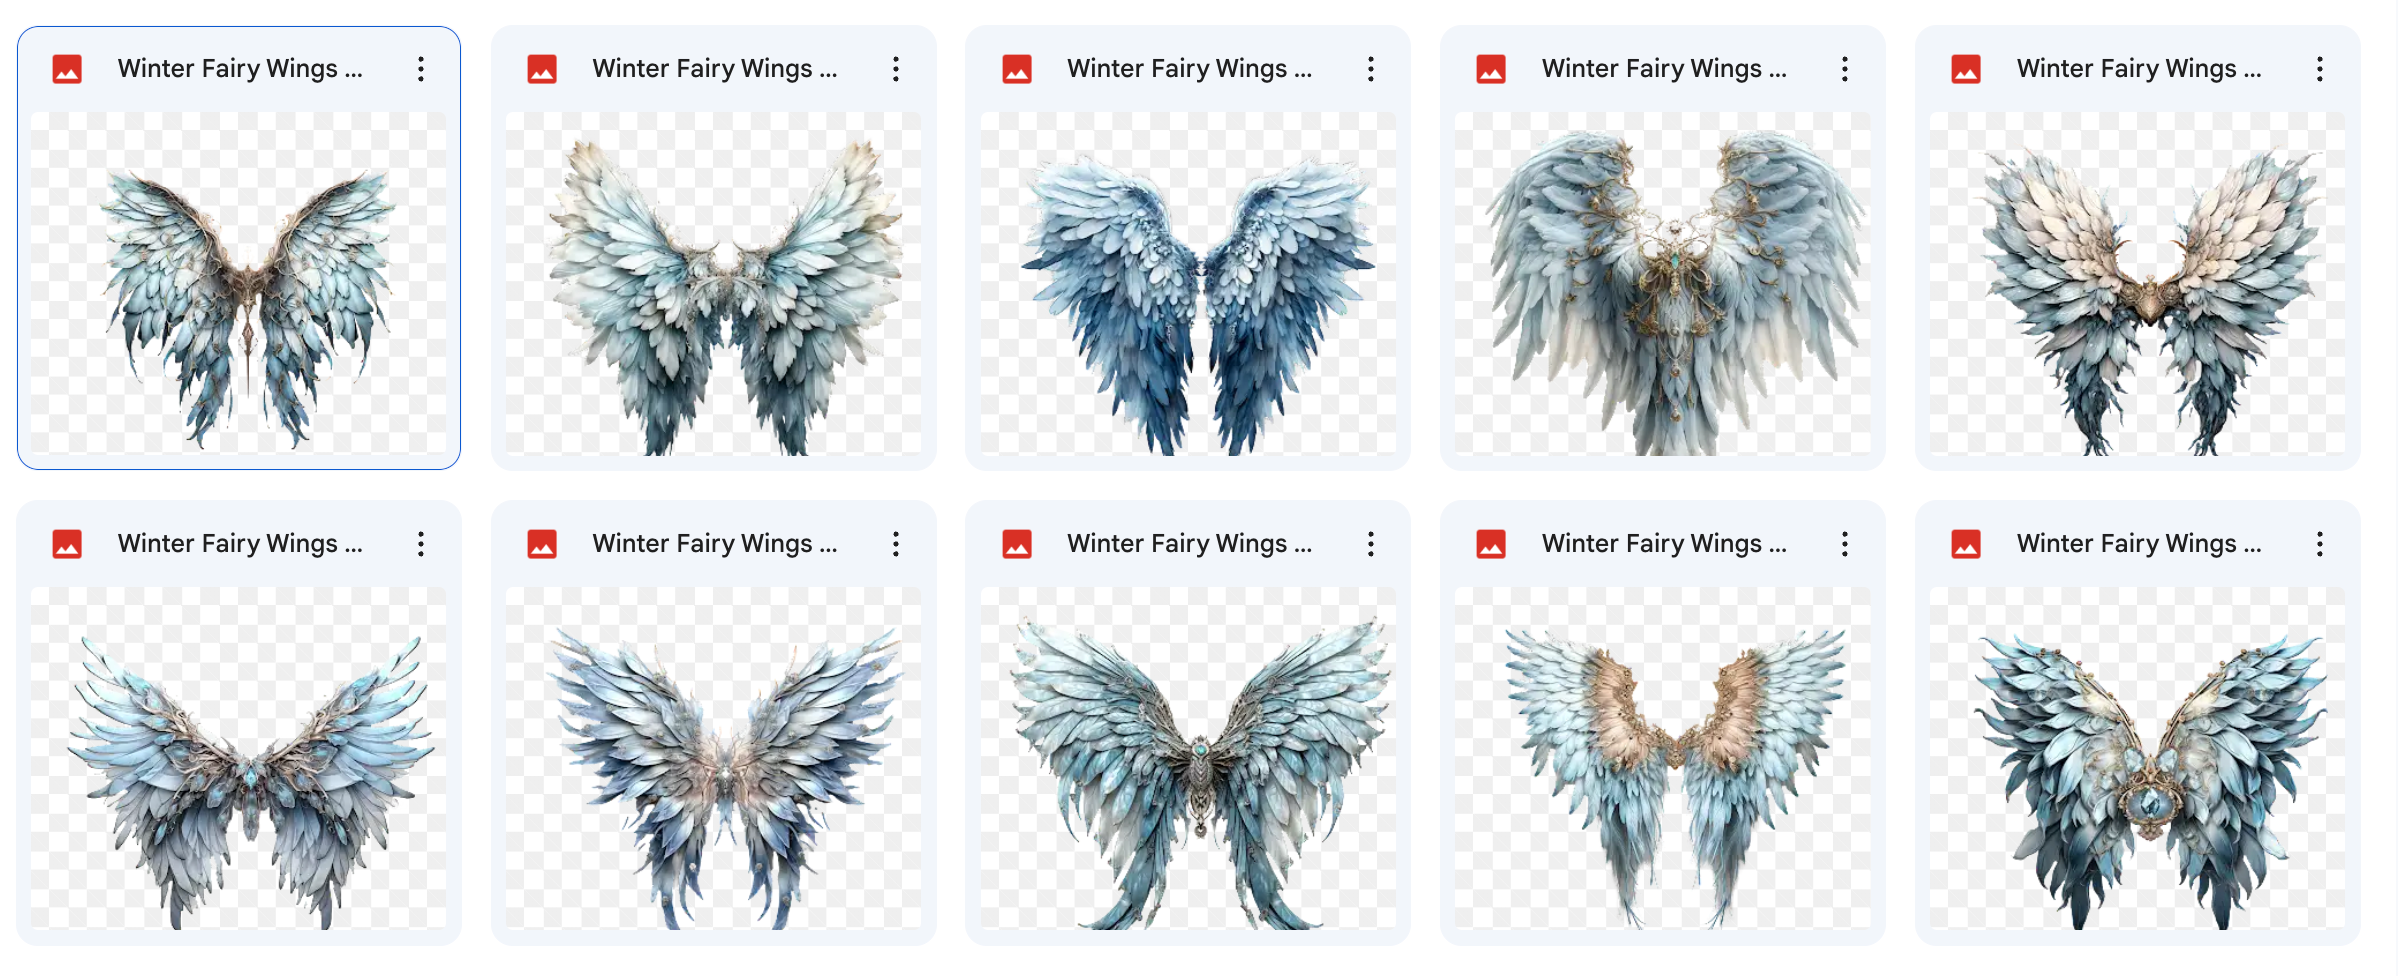 Magical Winter Fairy Wing Overlays - Meg Bitton Productions